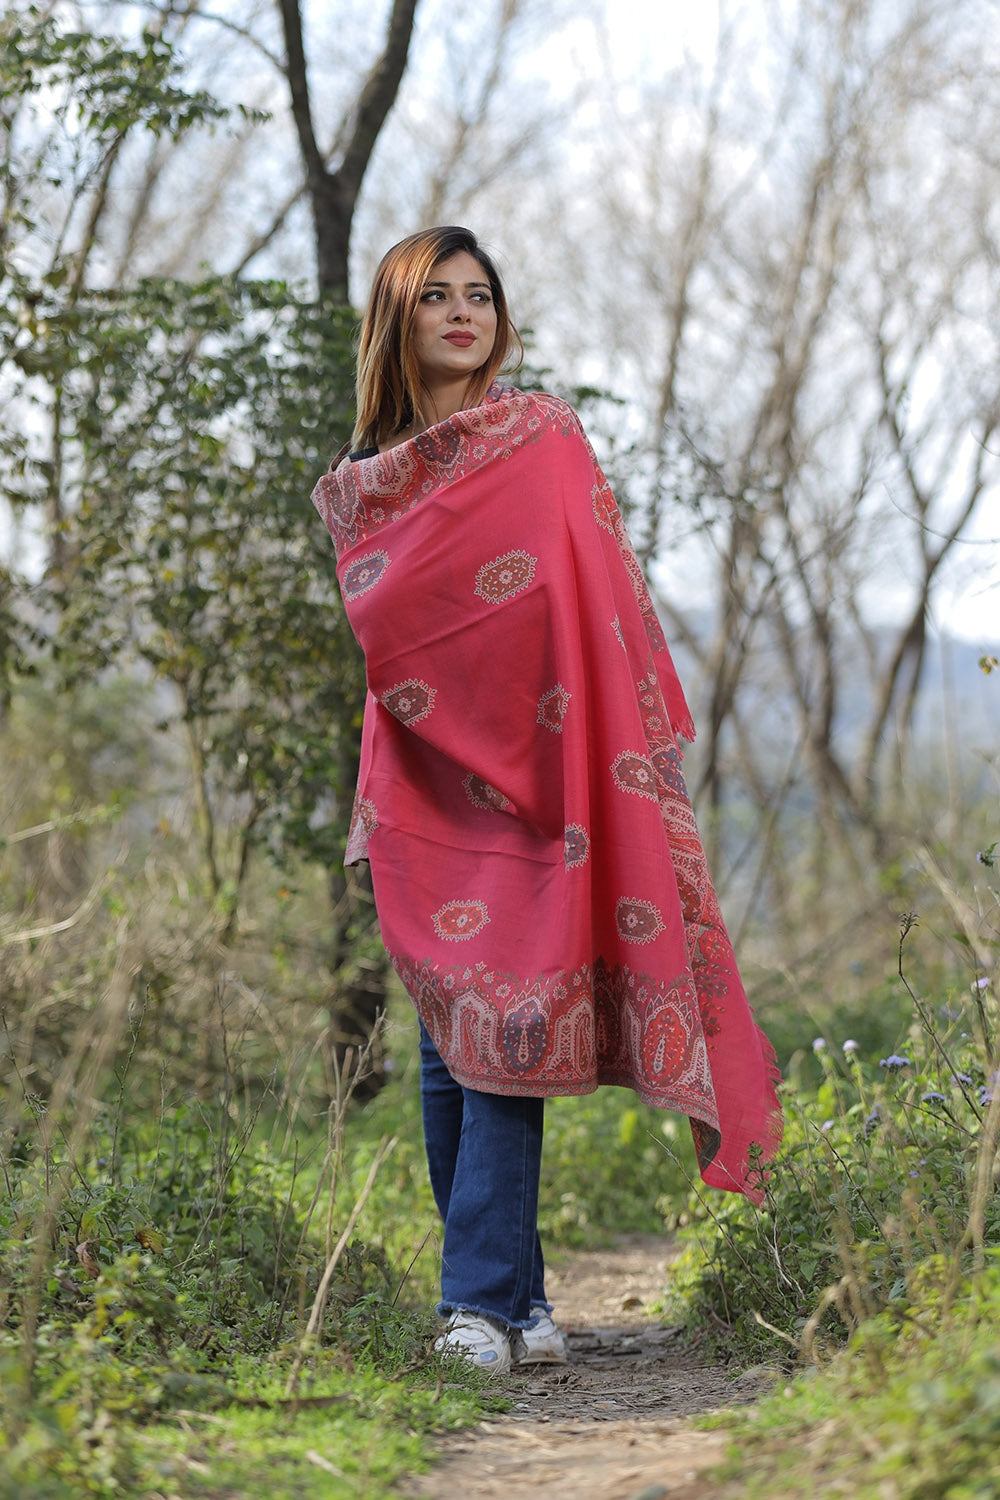 Mesmerizing Pink Colour Shawl With Flower Pattern Style